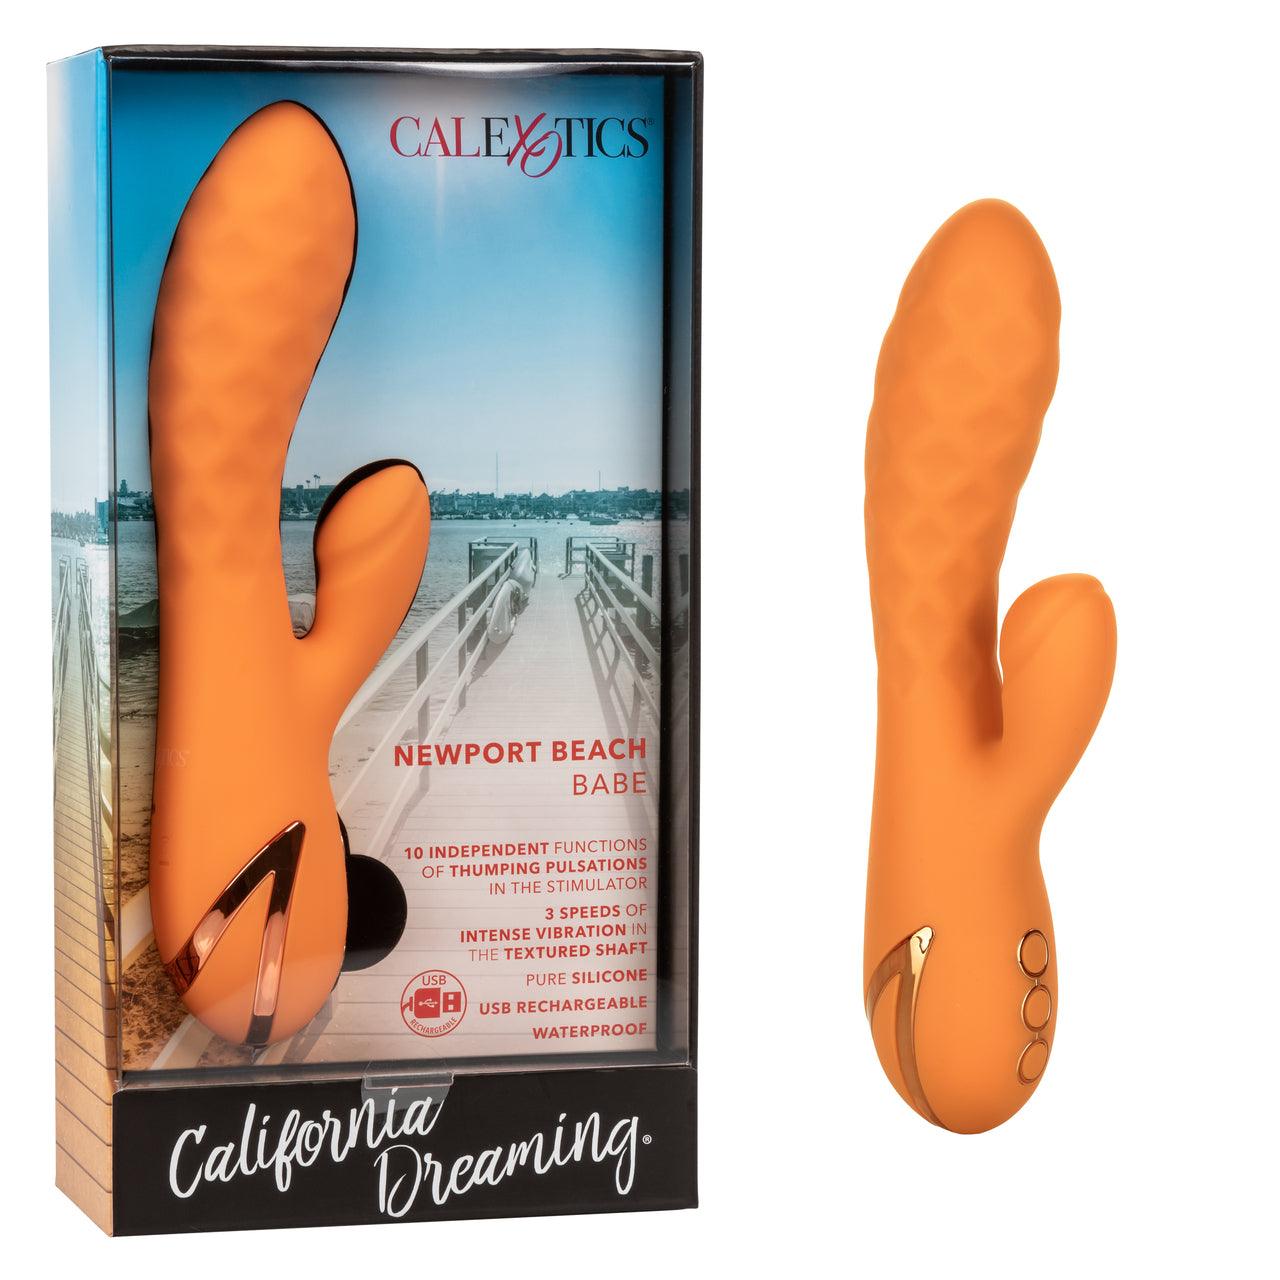 Calexotics California Dreaming Newport Beach Babe - Buy At Luxury Toy X - Free 3-Day Shipping